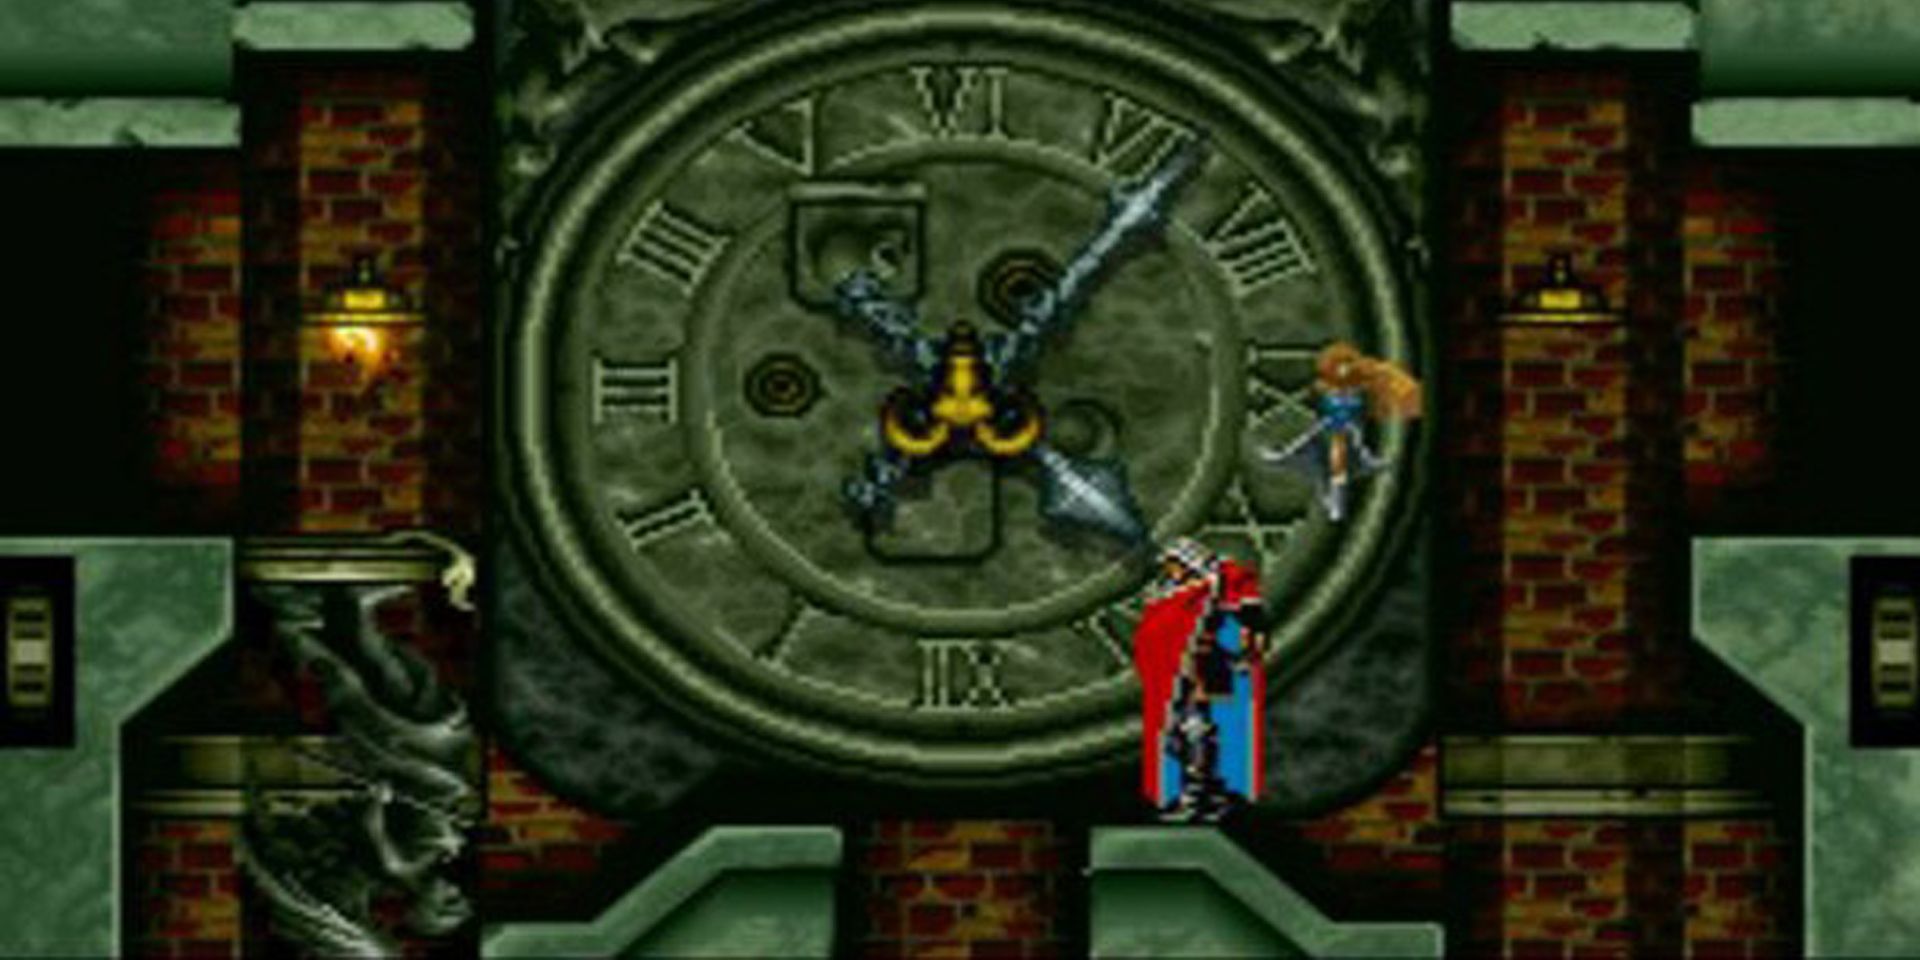 Alucard and his familiar fairy stand in front of the clock in the Inverted Castle in Castlevania: Symphony of the Night.